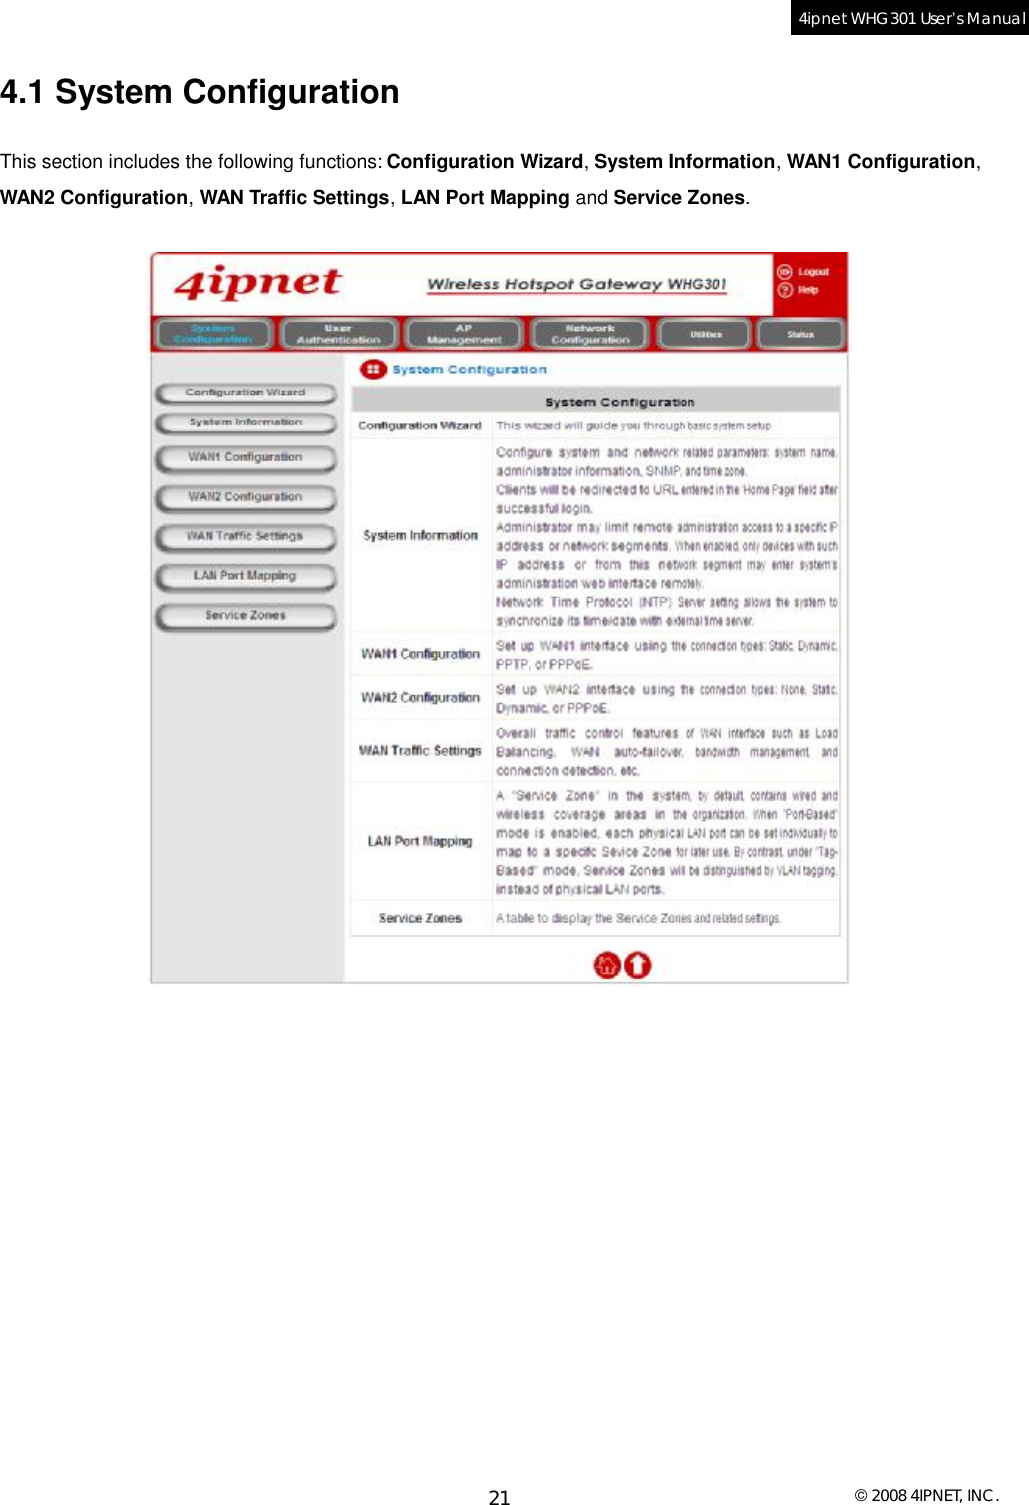  © 2008 4IPNET, INC. 21 4ipnet WHG301 User’s Manual  4.1 System Configuration This section includes the following functions: Configuration Wizard, System Information, WAN1 Configuration, WAN2 Configuration, WAN Traffic Settings, LAN Port Mapping and Service Zones.    